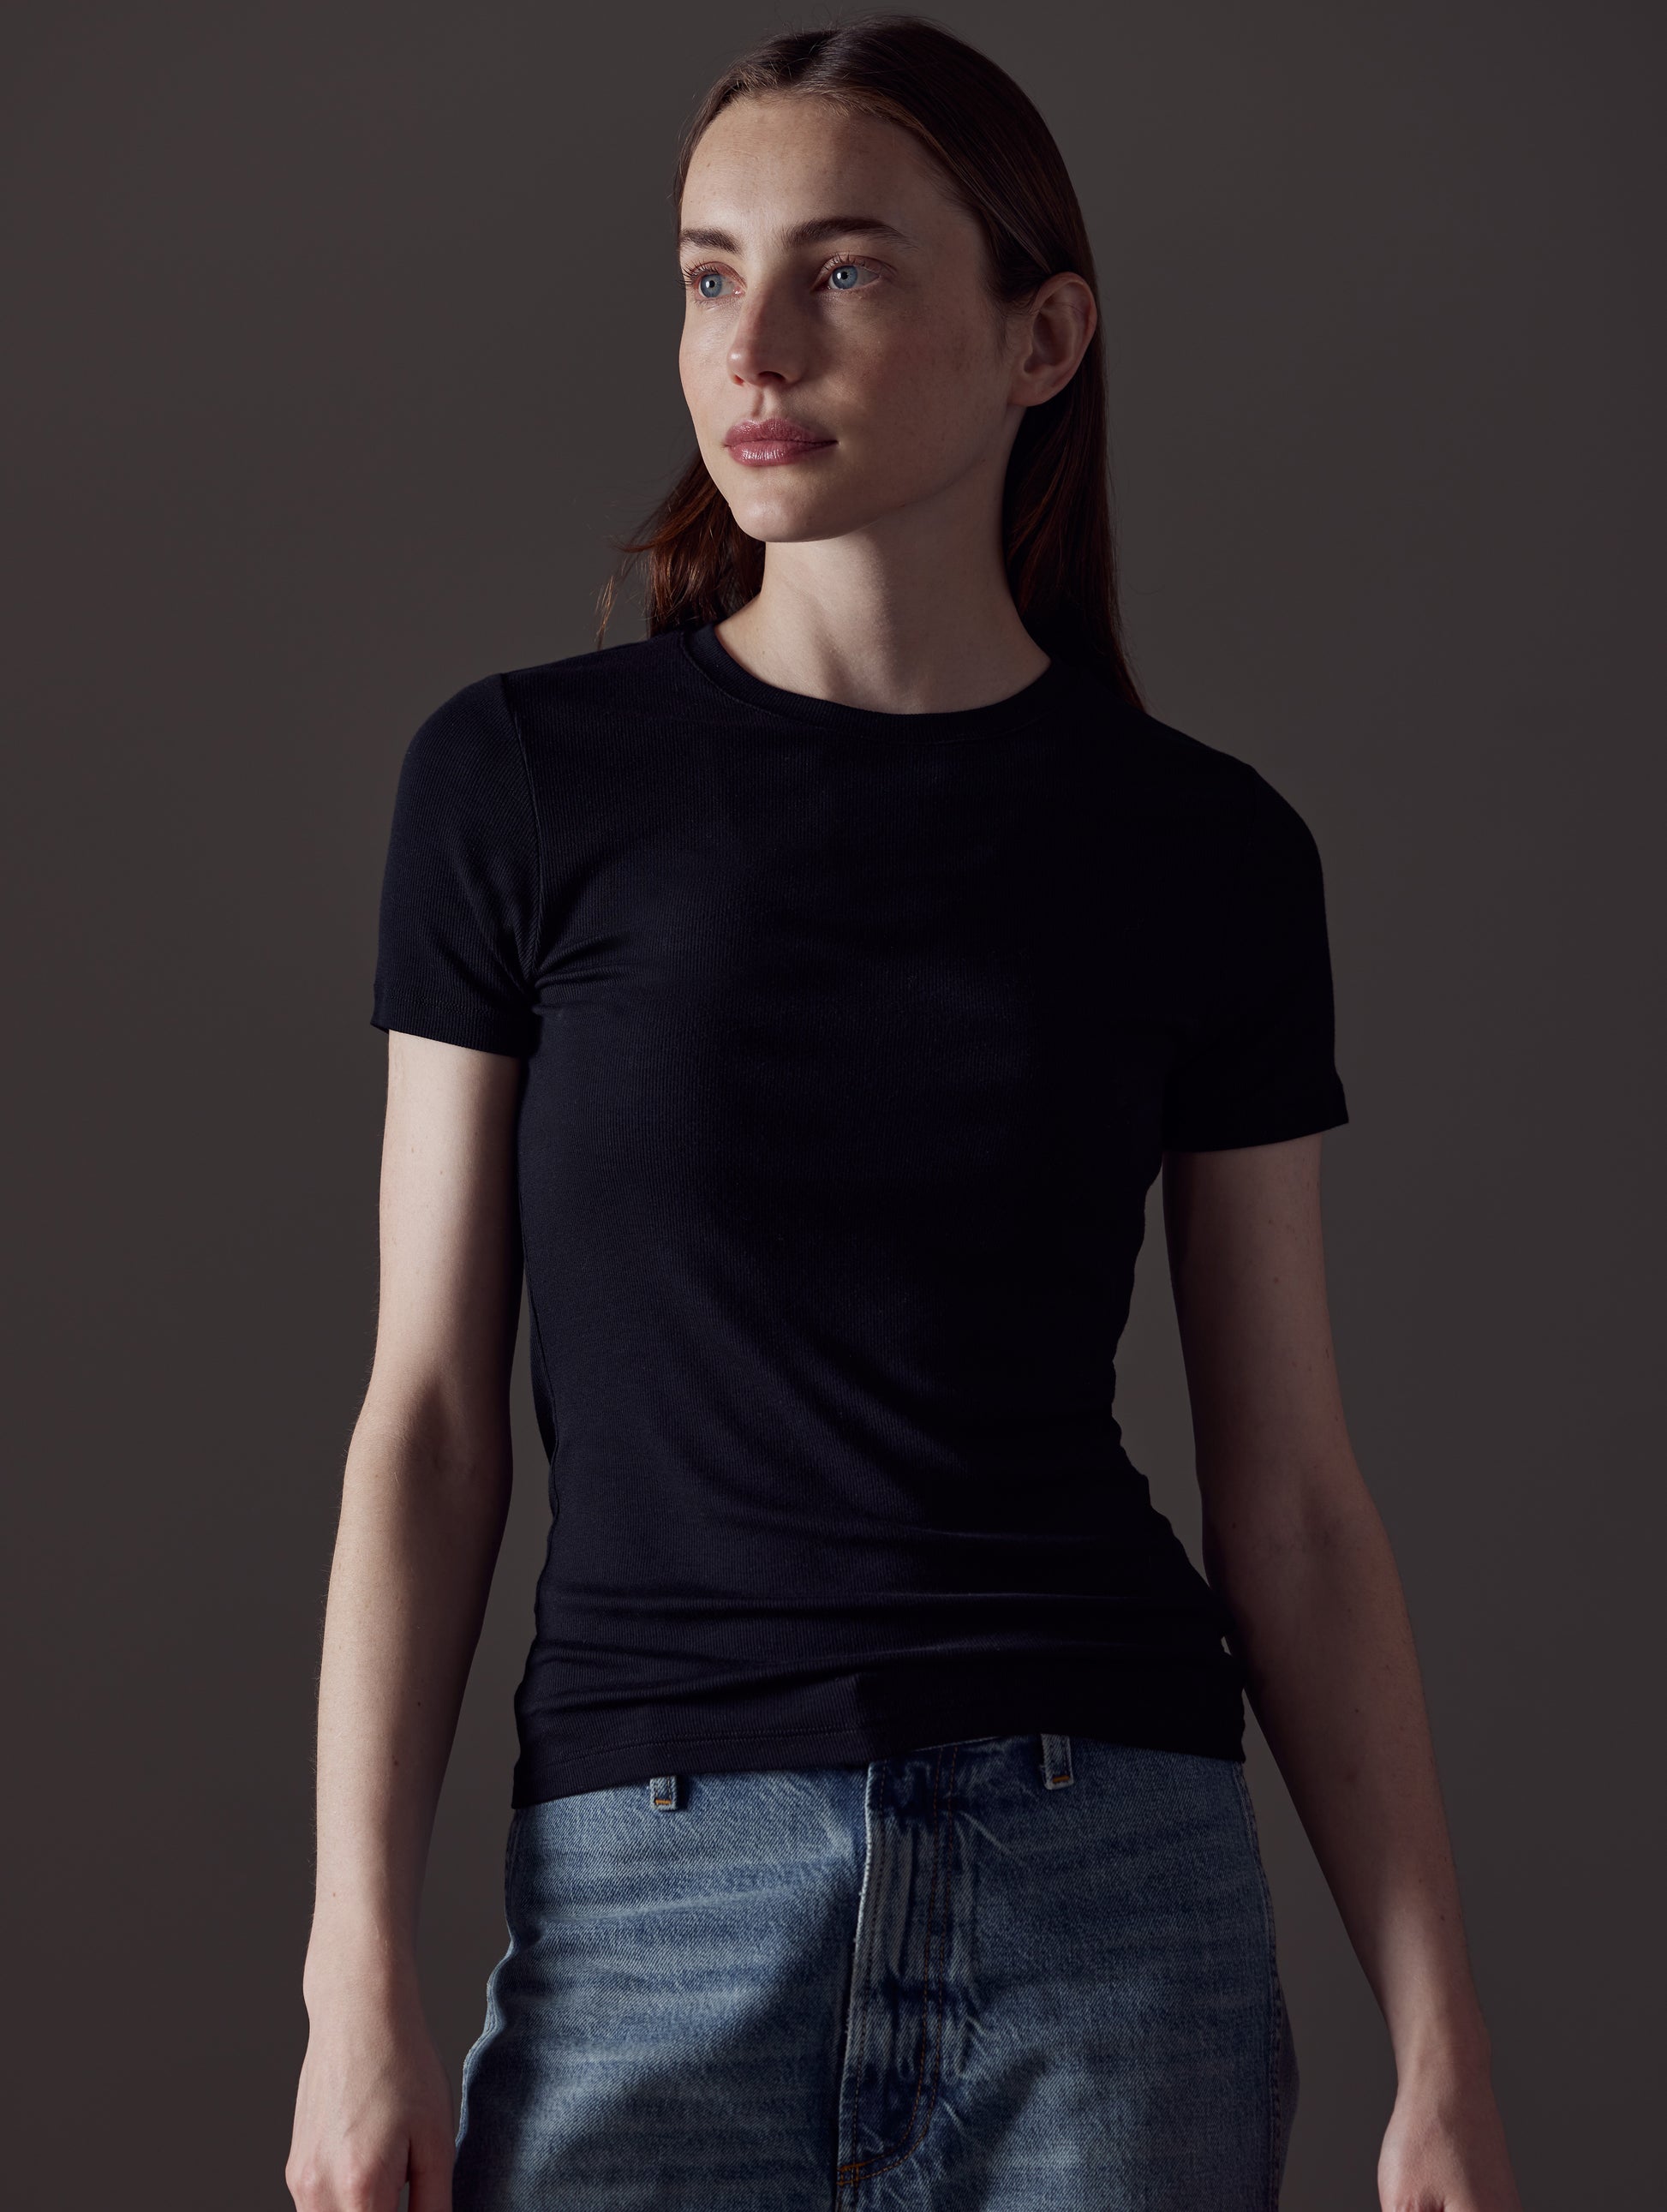 woman wearing black short-sleeve shirt from AETHER Apparel